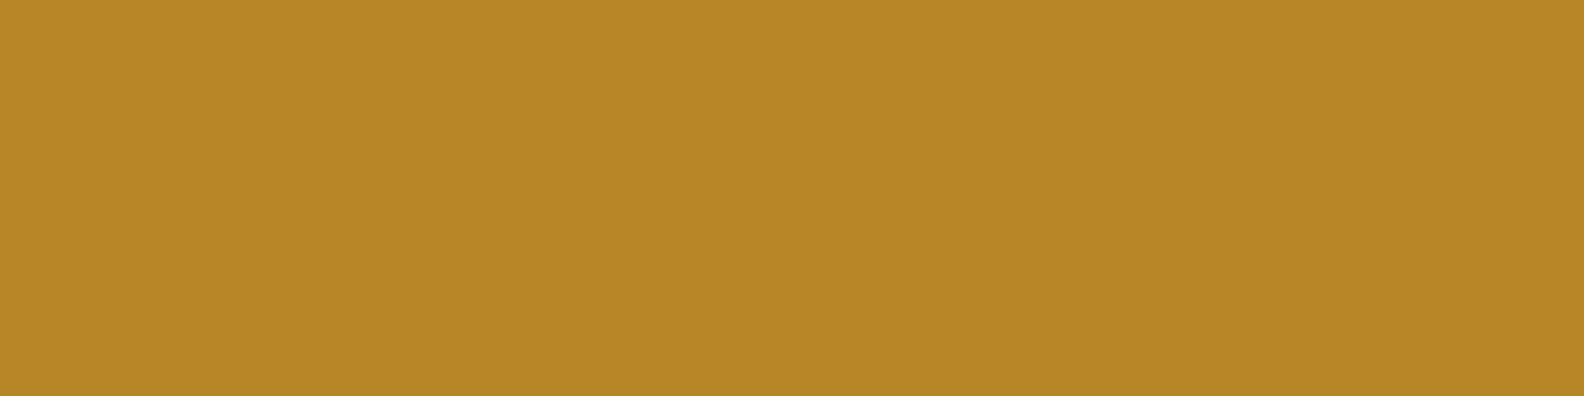 1584x396 University Of California Gold Solid Color Background